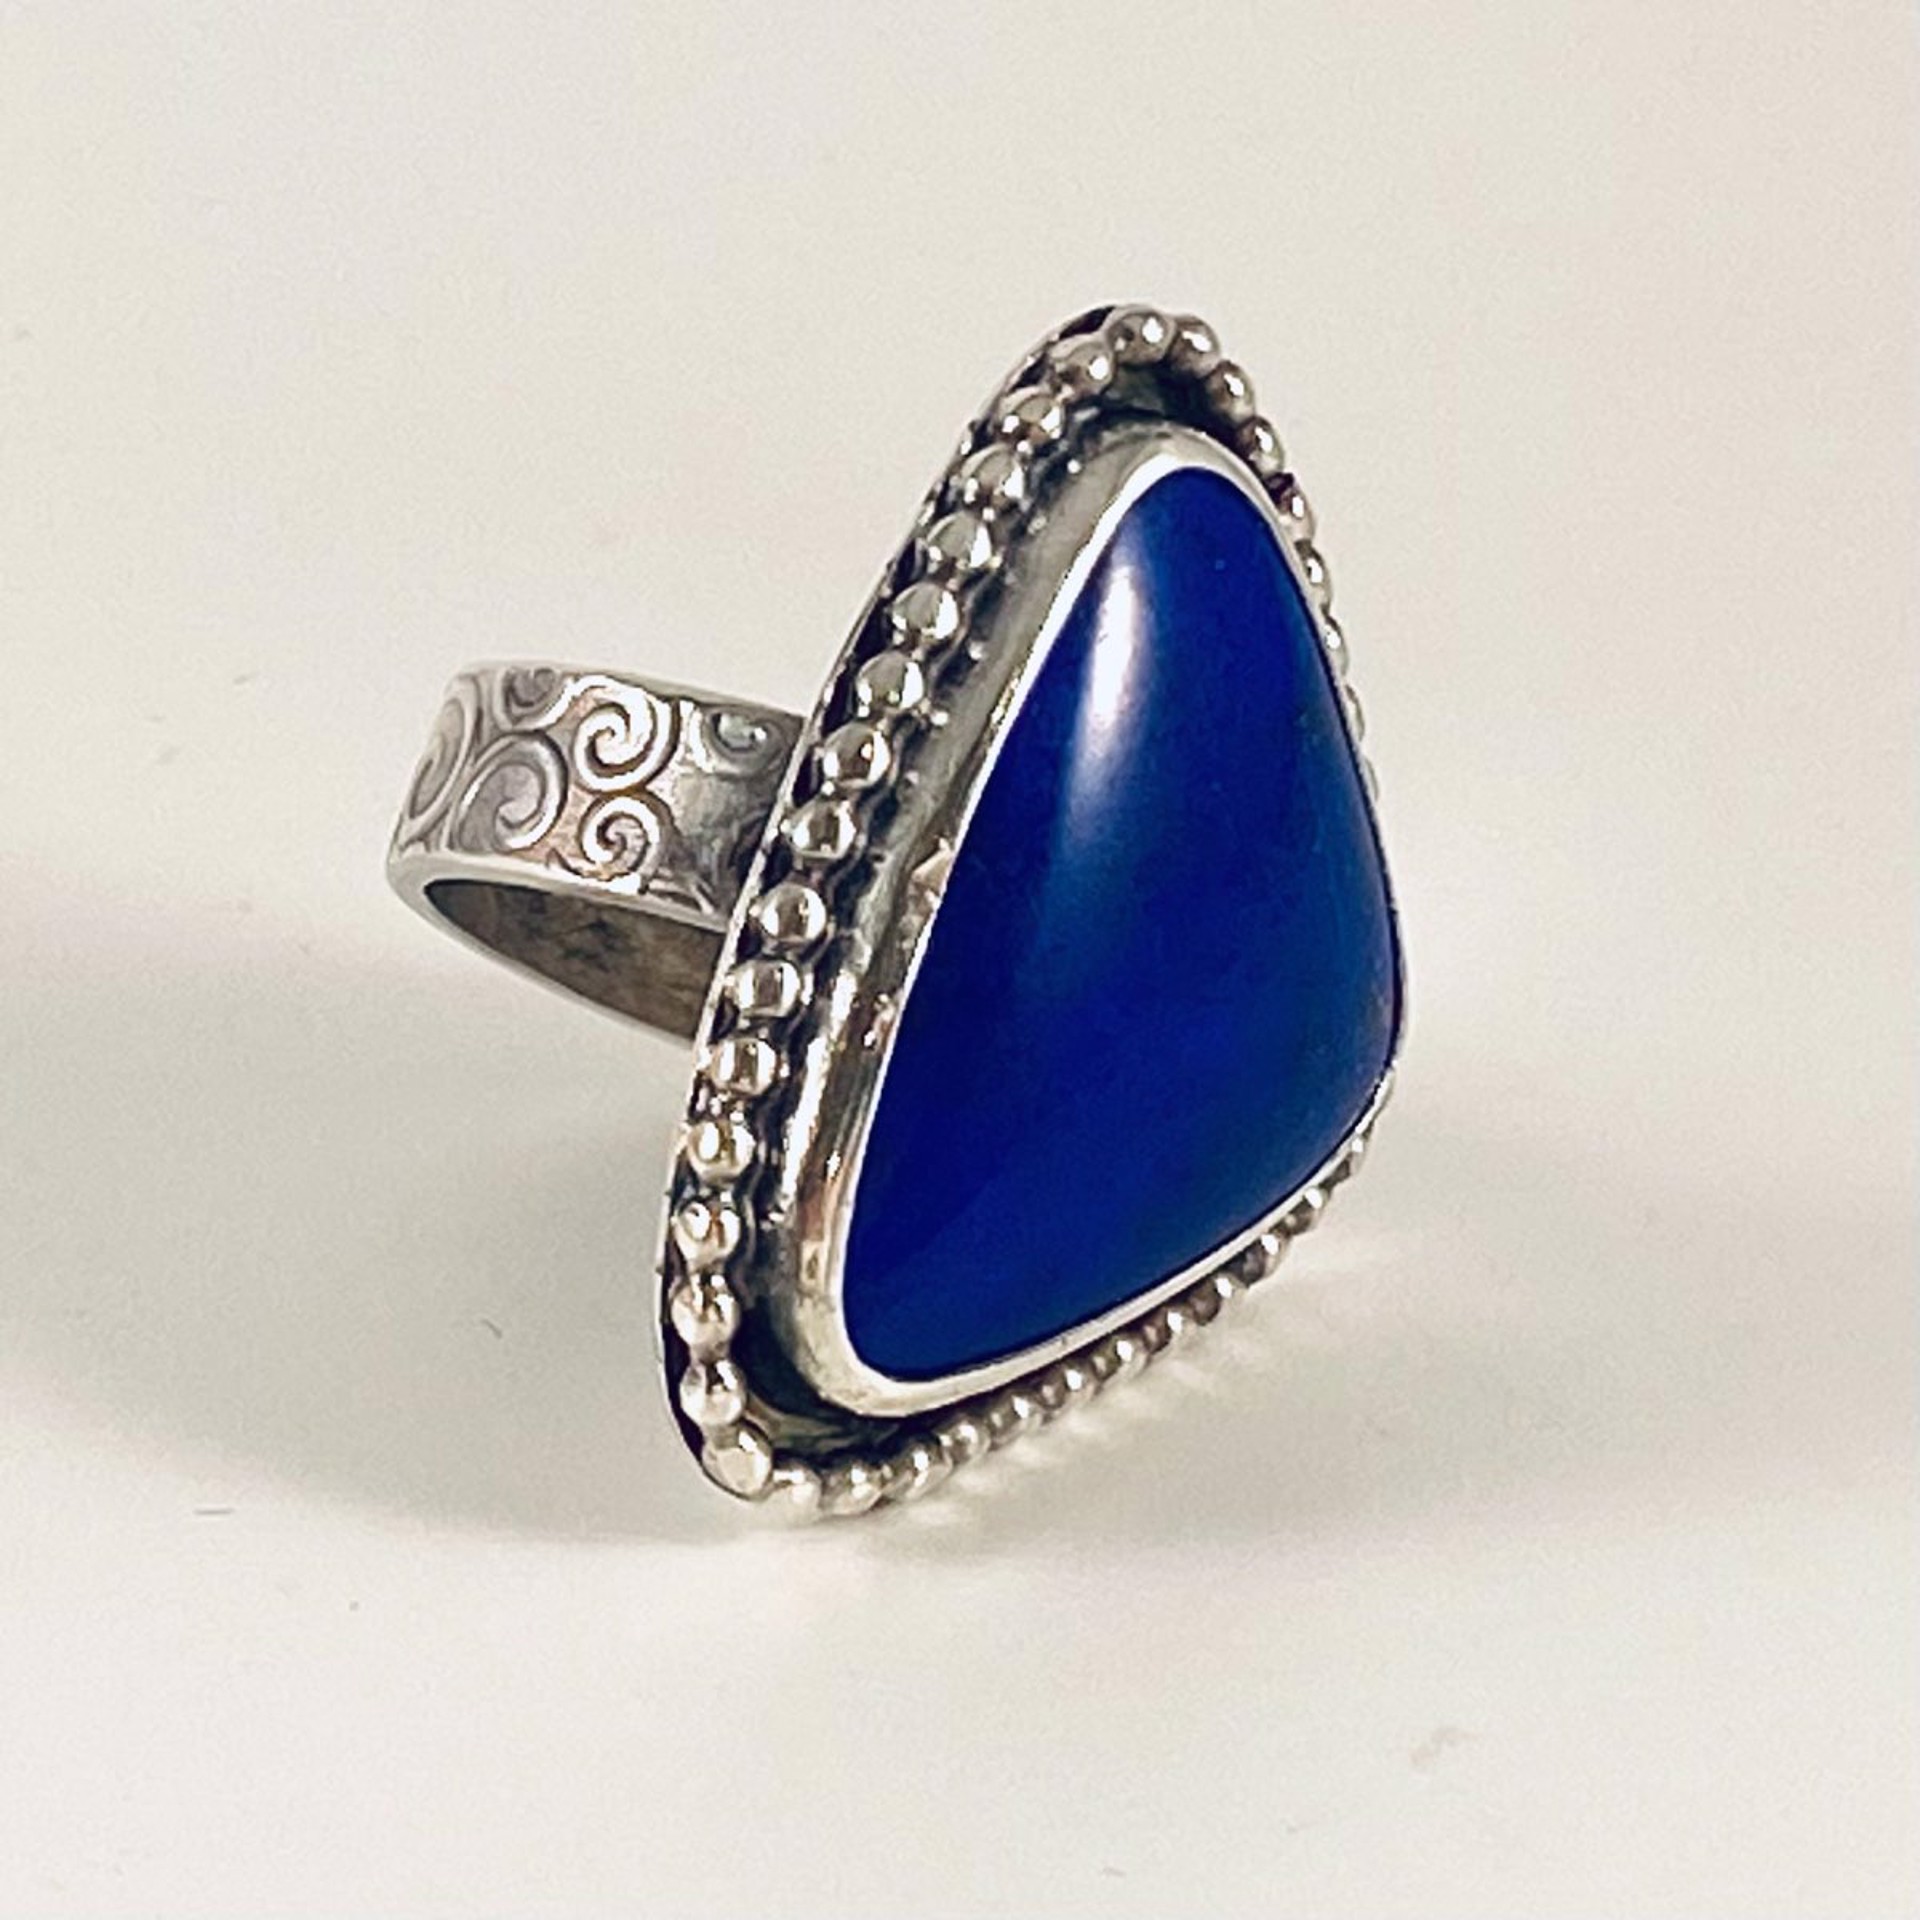 Triangle Lapis Lazuli Ring sz6.5 AB22-27 by Anne Bivens